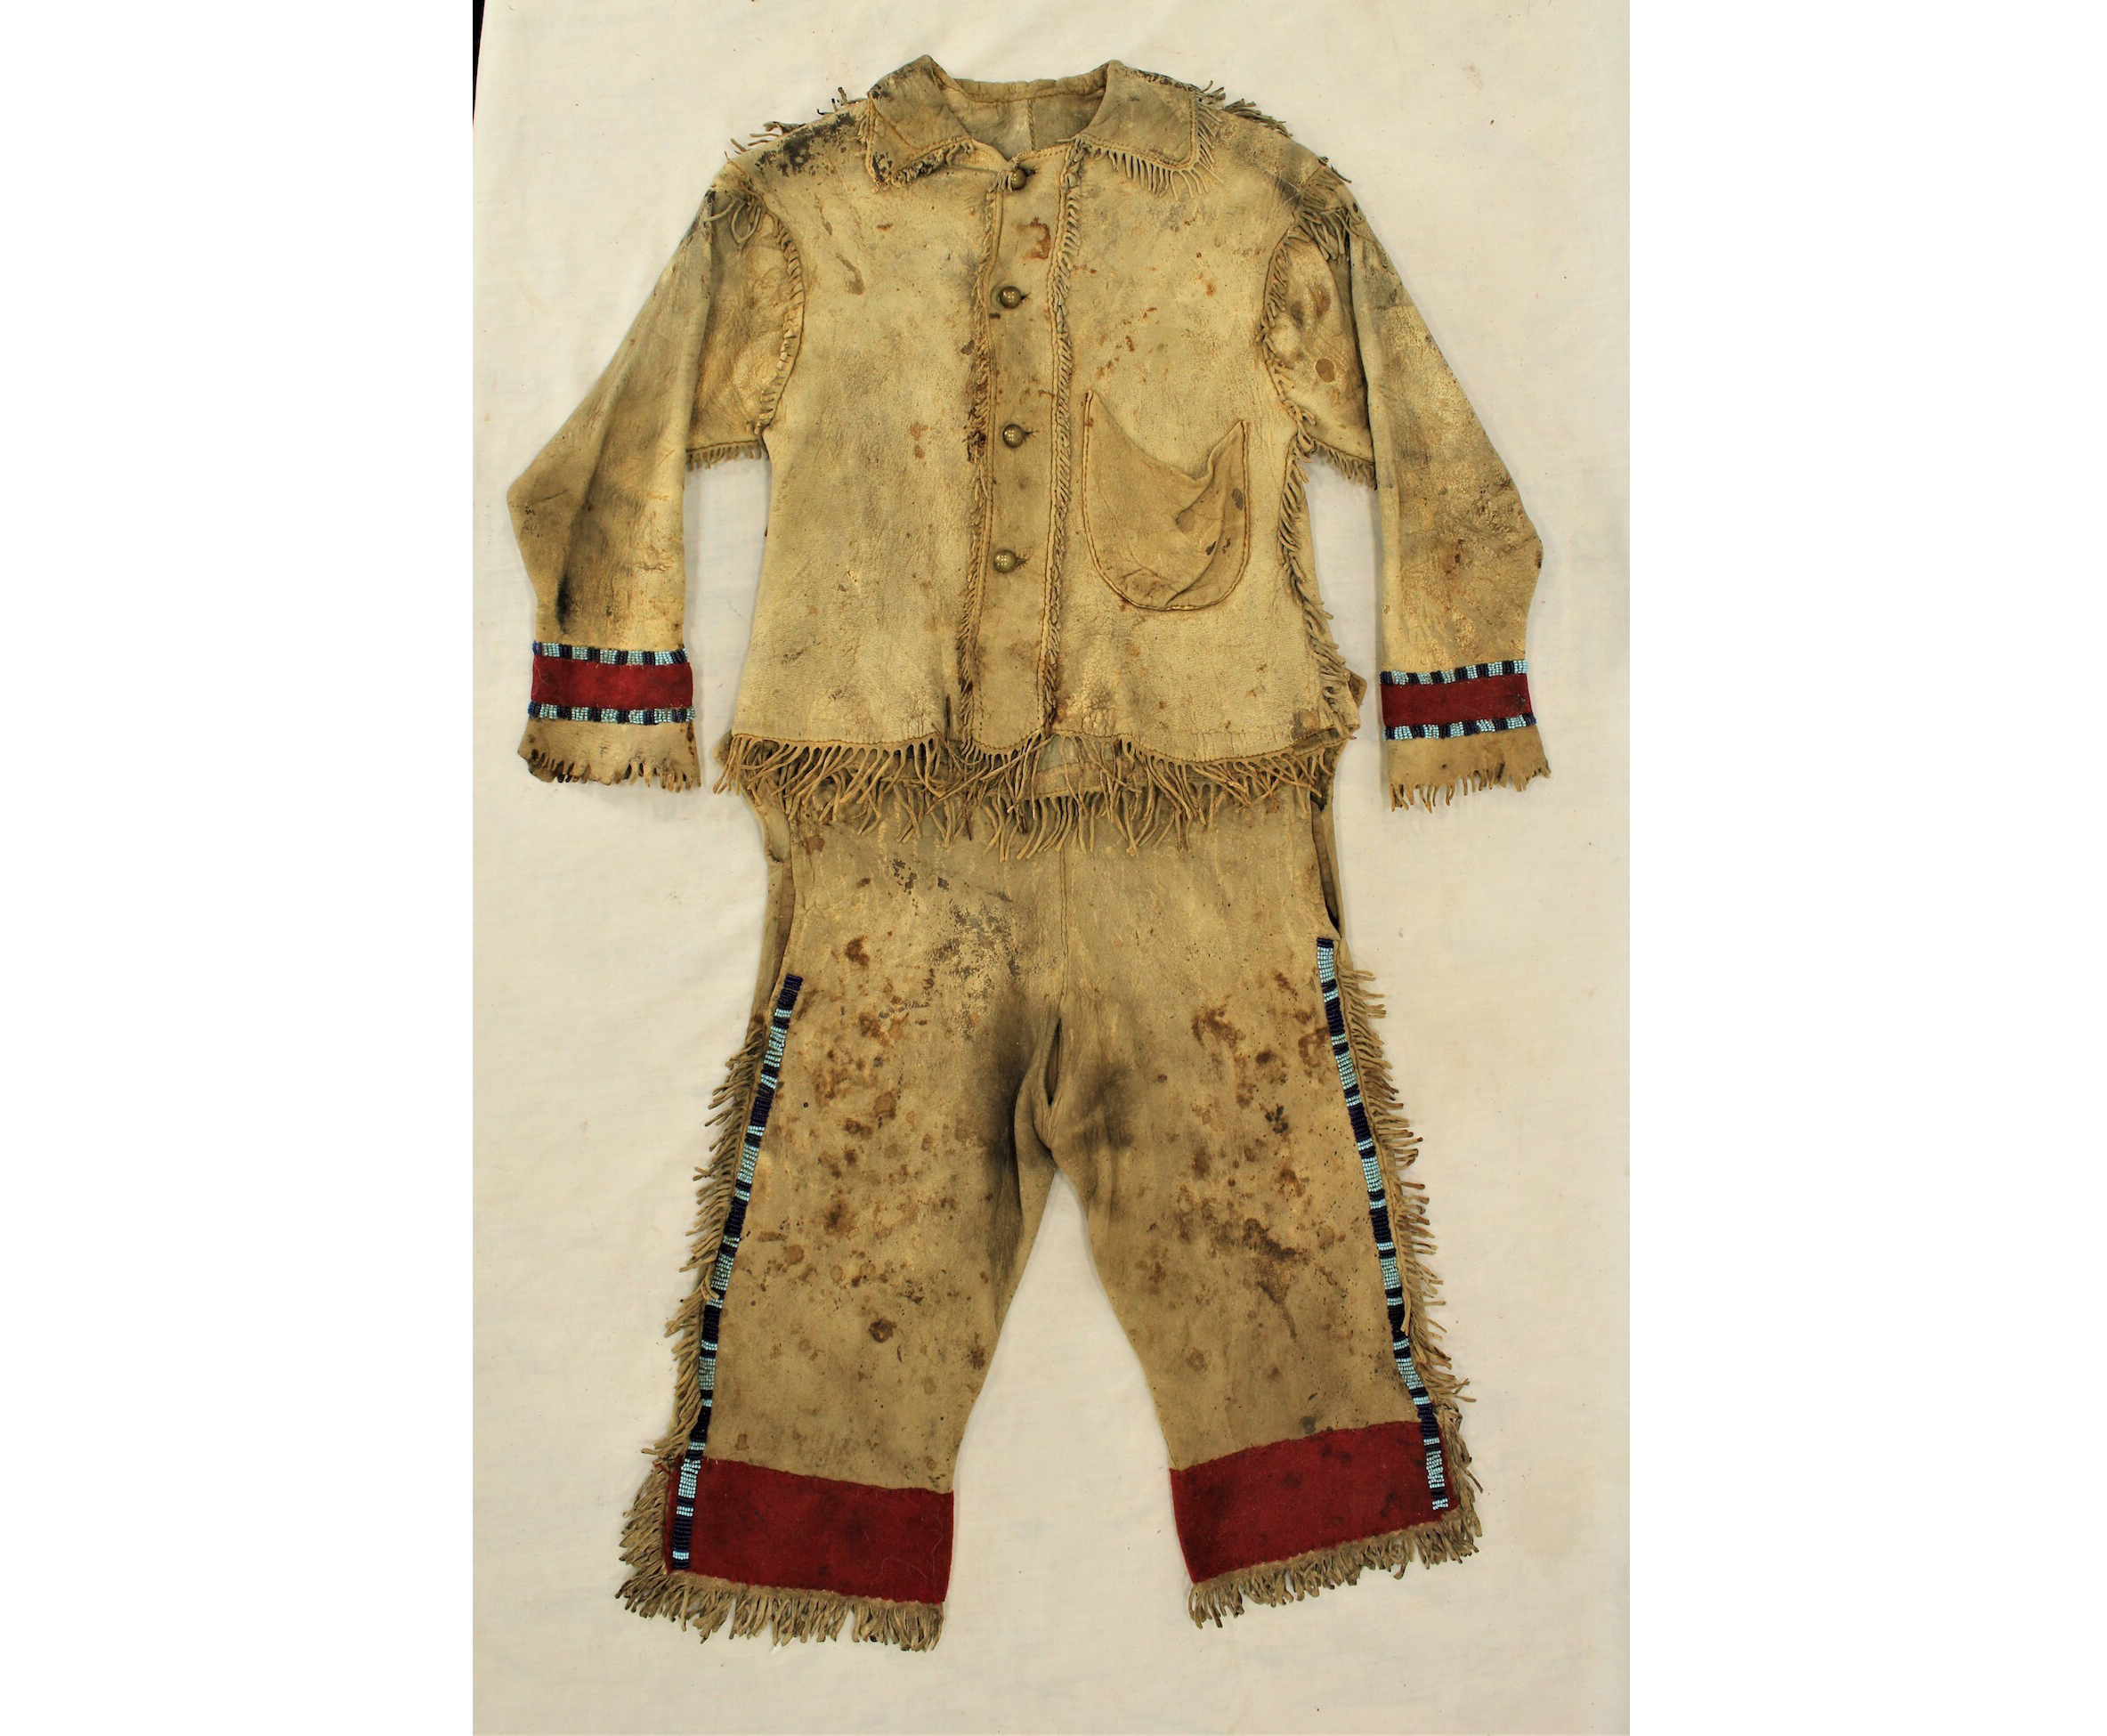 Phenomenal 1880s Crow Indian child’s buckskin shirt and pants. Fringed throughout, with trade-cloth cuffs and early cobalt blue and robin’s-egg blue beads. Est. $2,000-$4,000